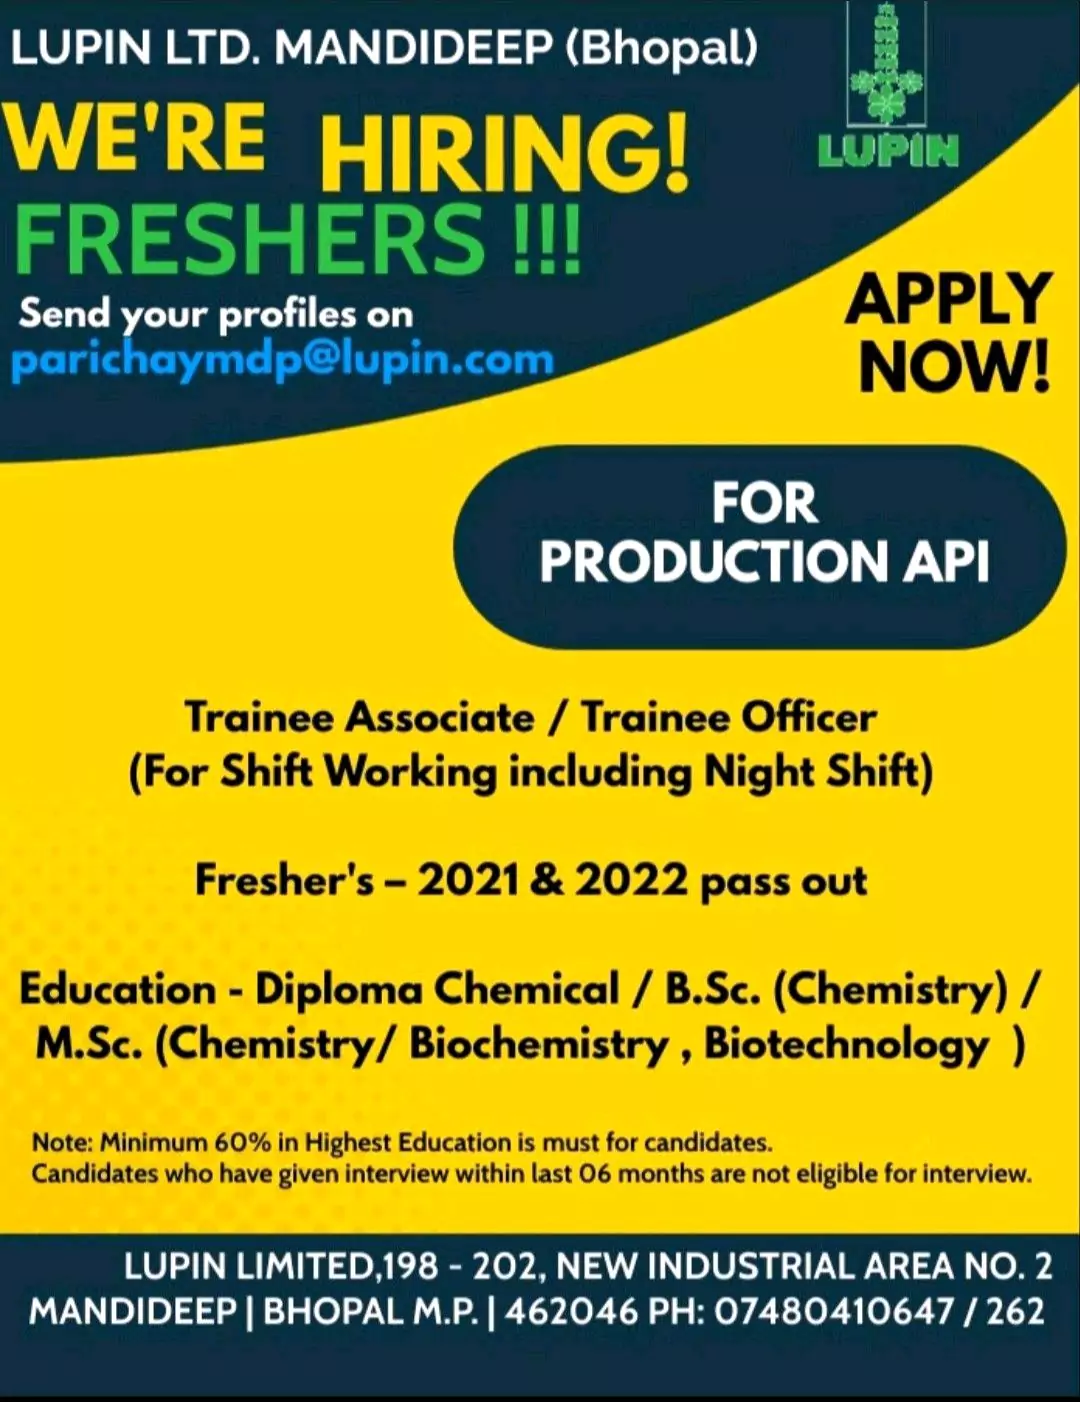 Lupin Pharma Hiring for Diploma Chemical ,BSC (Chemistry), MSC (Chemistry, Biochemistry, Biotechnology) candidates